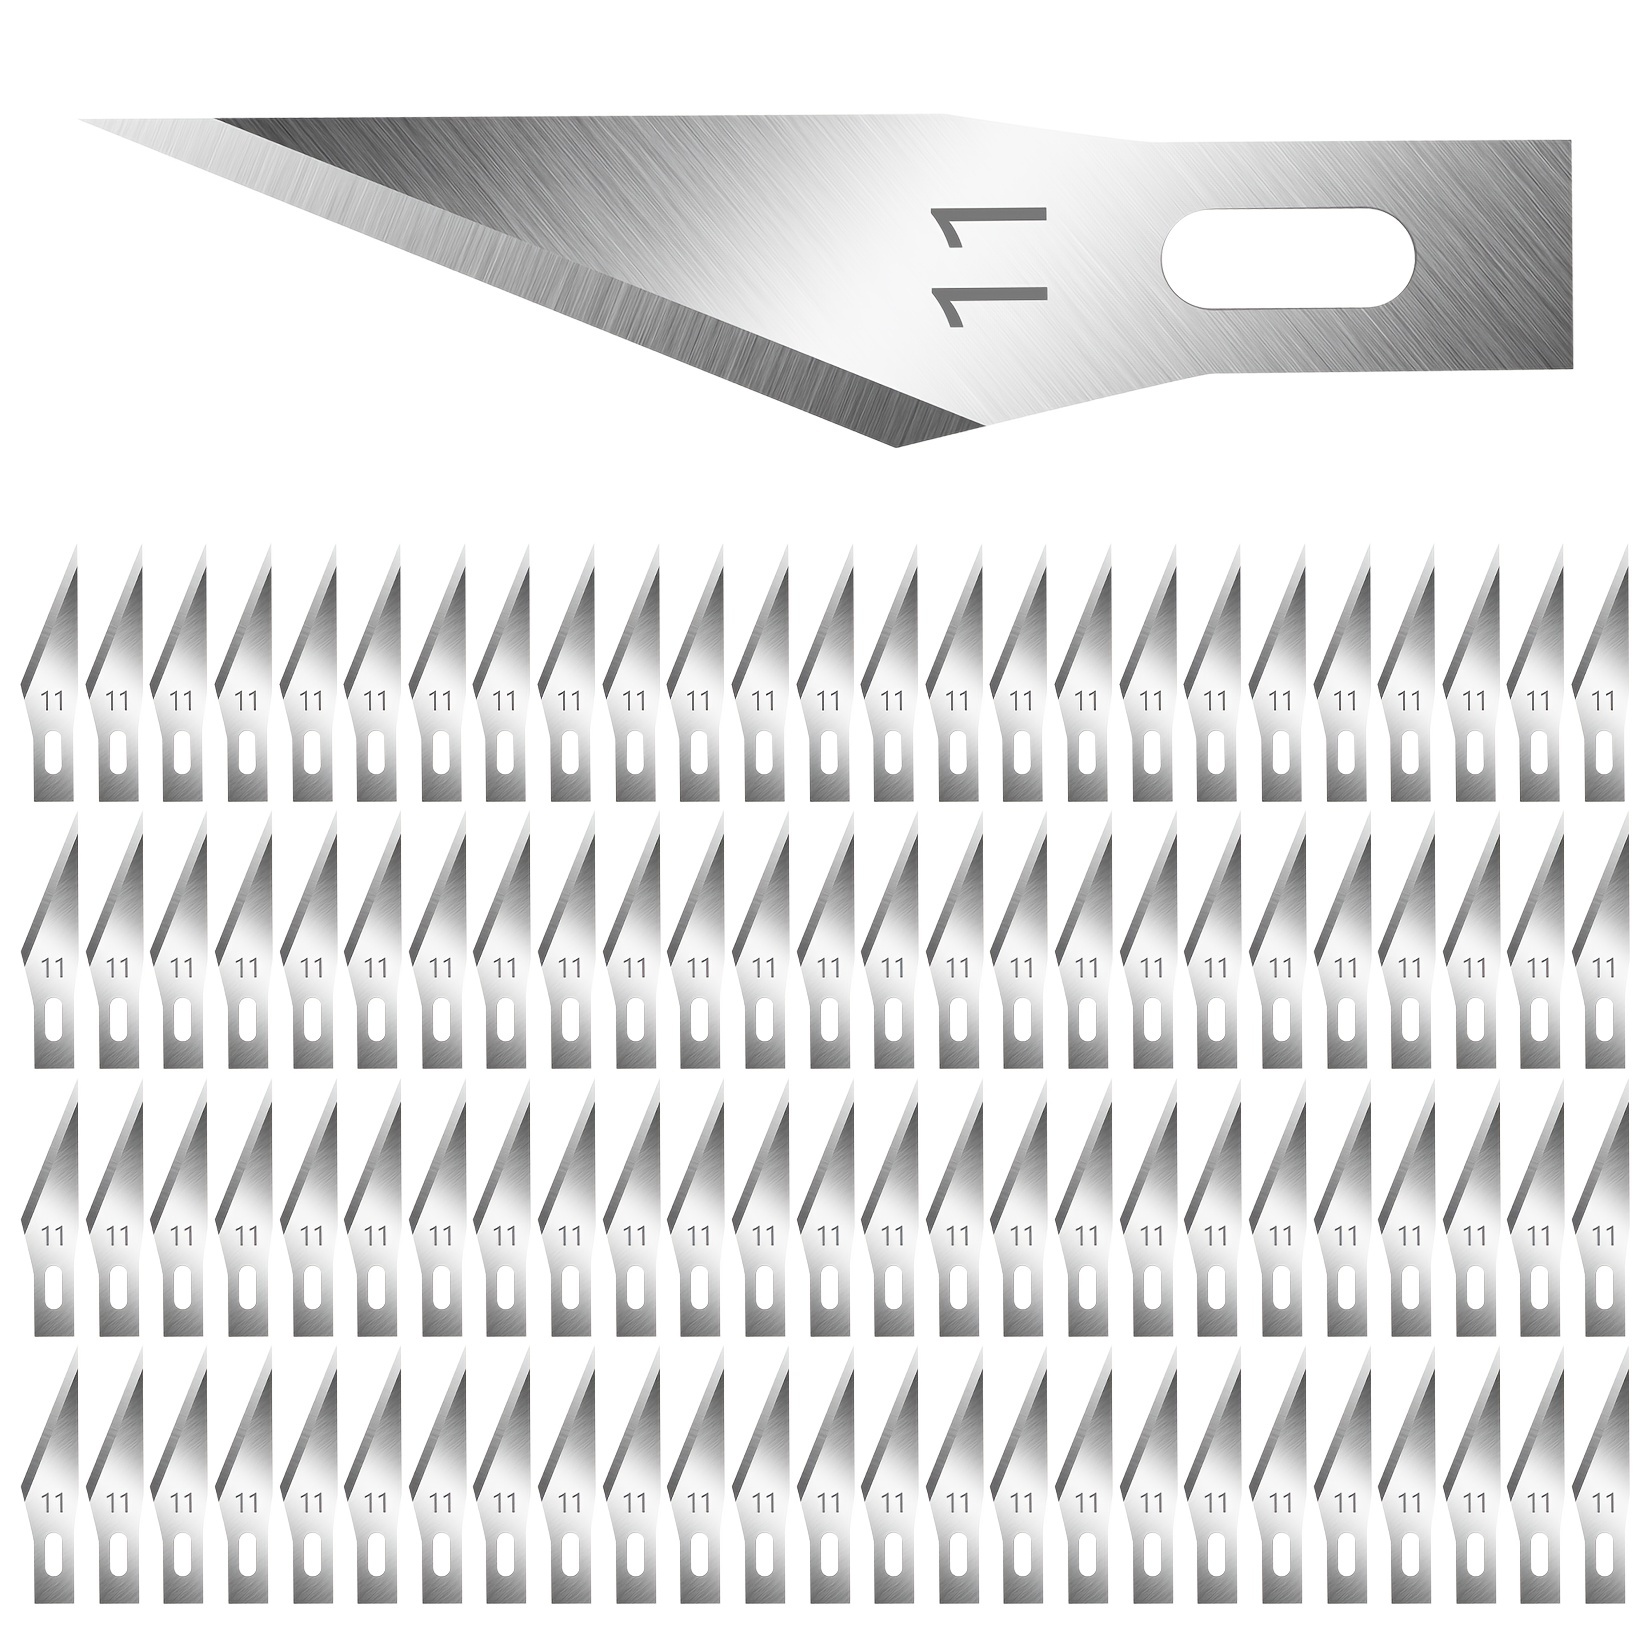 10 each #11 Exacto Knife Blades Refills, High Carbon Steel - Ships